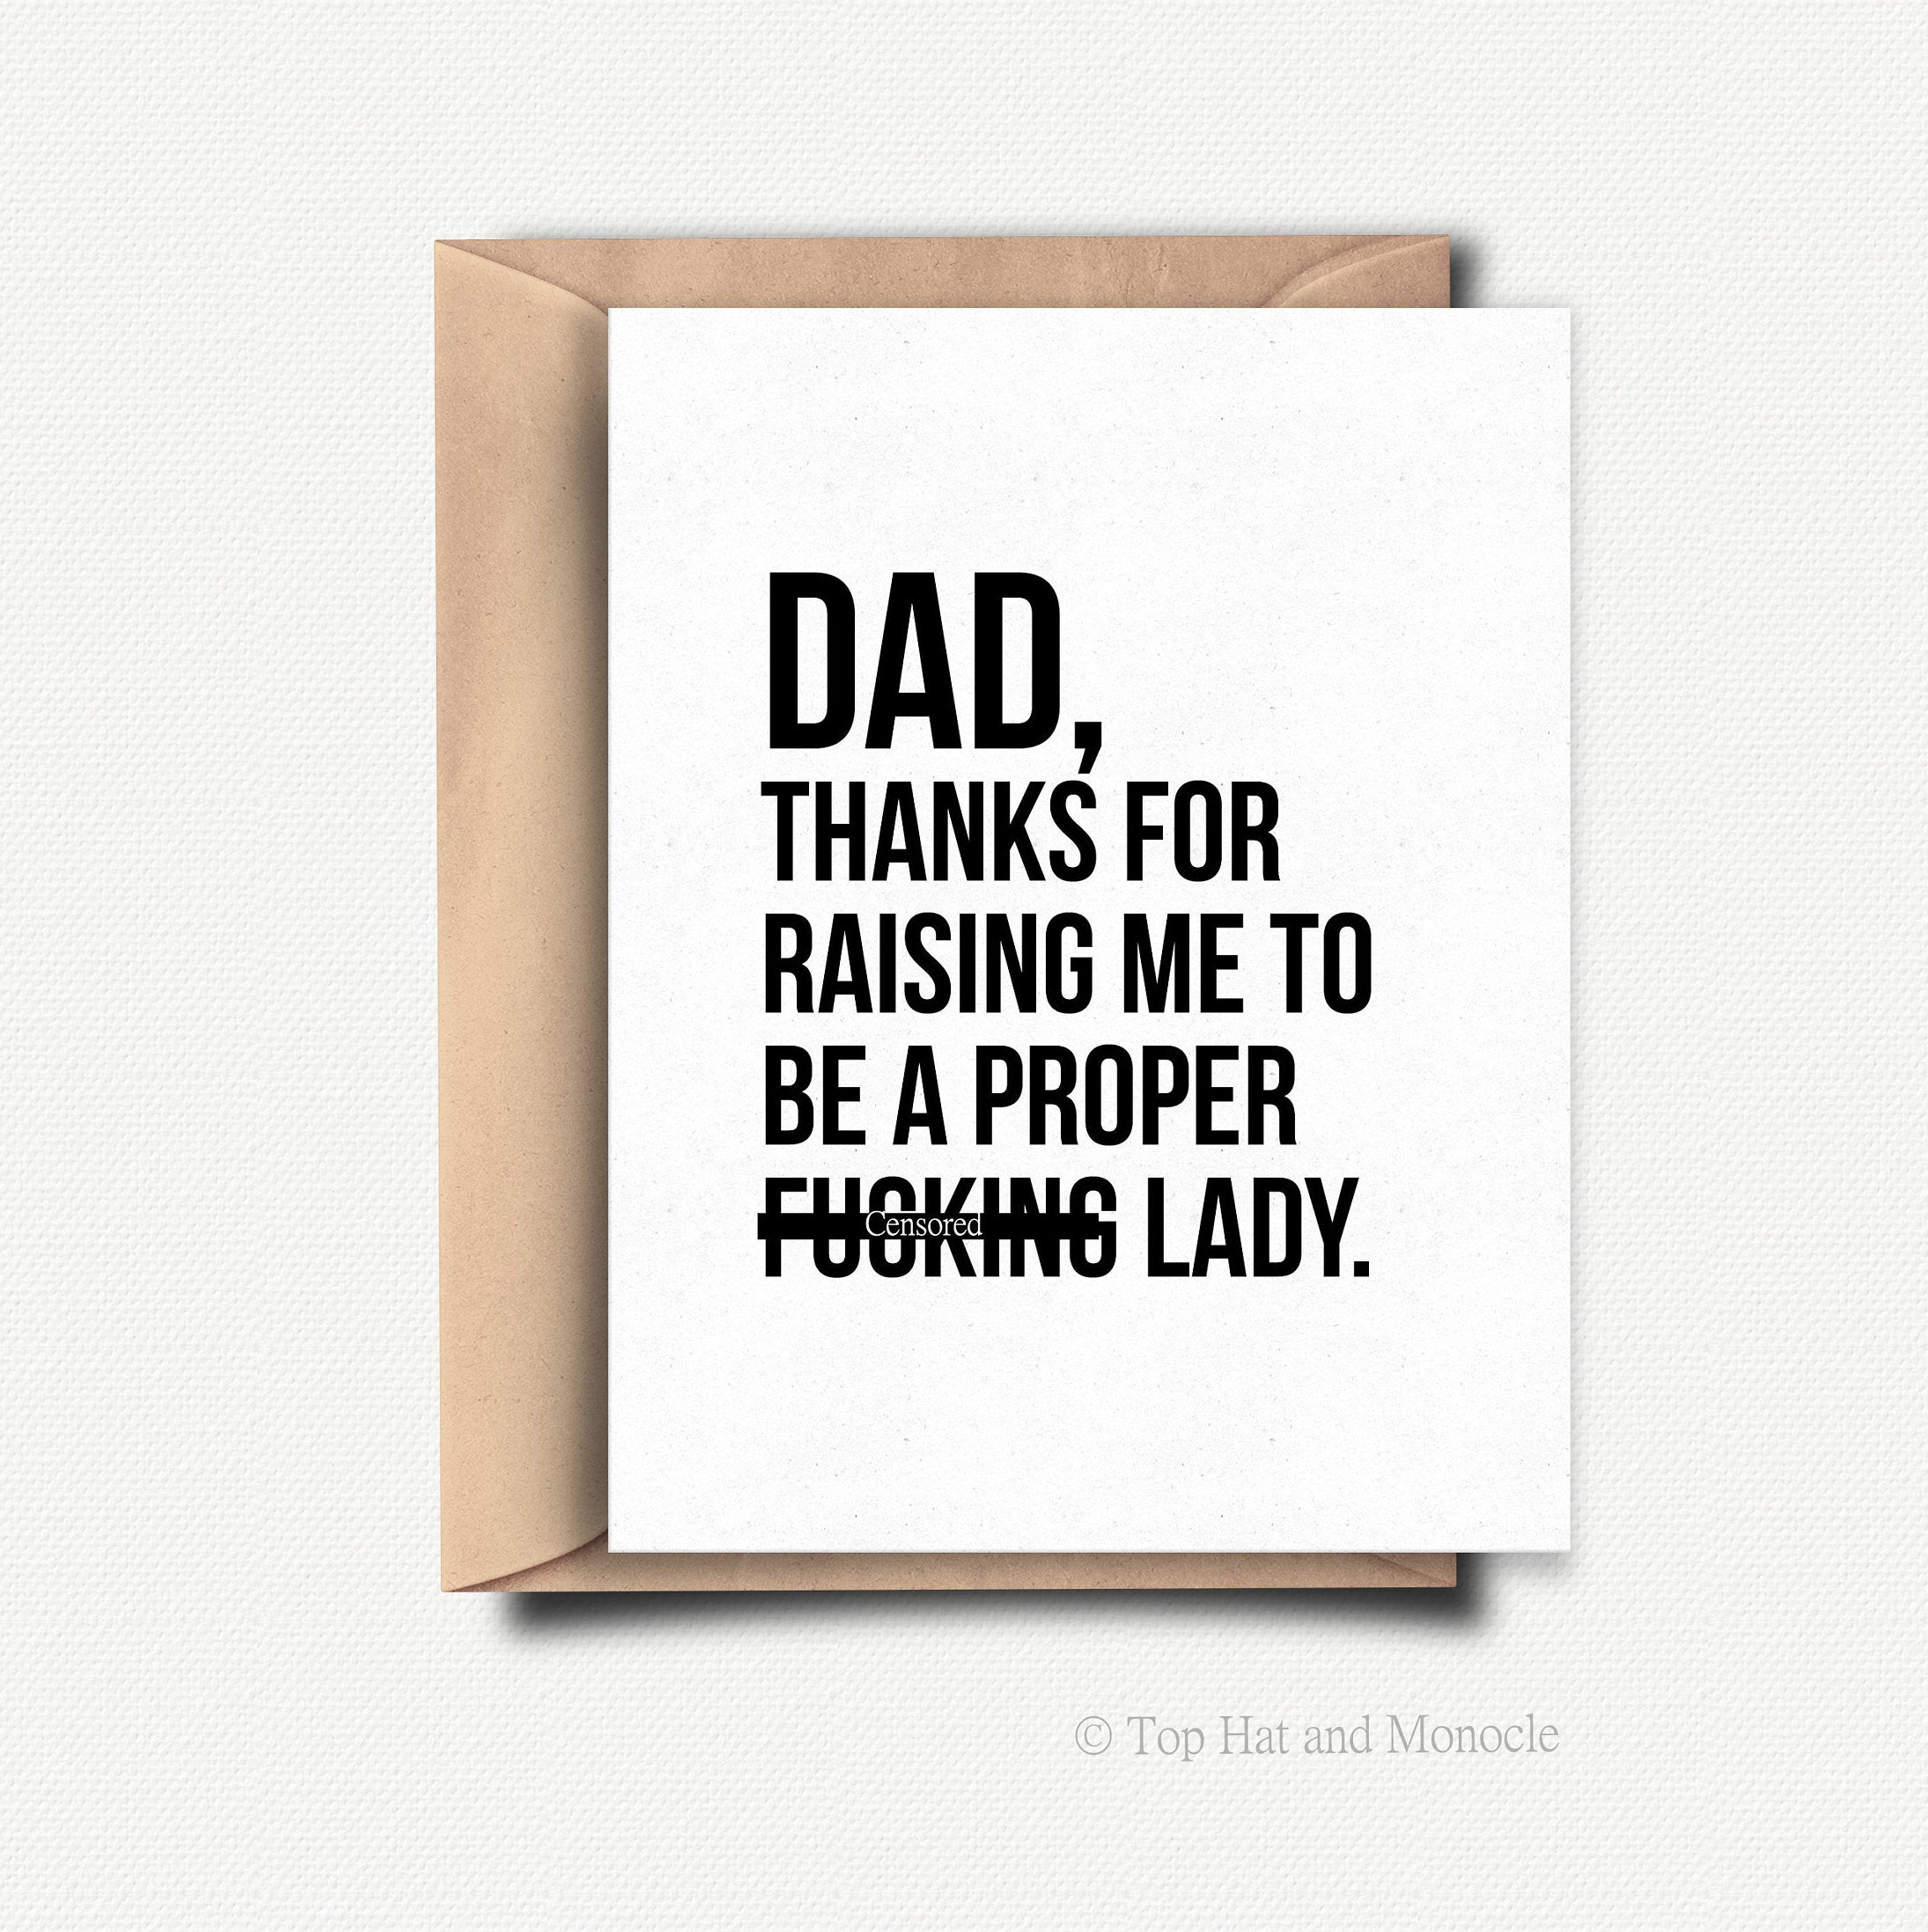 Card Ideas For Dad Birthday Funny Fathers Day Card Funny Fathers Day Gift From Daughter Funny Fathers Day Gift Ideas For Dad Birthday Card From Daughter Dad Card